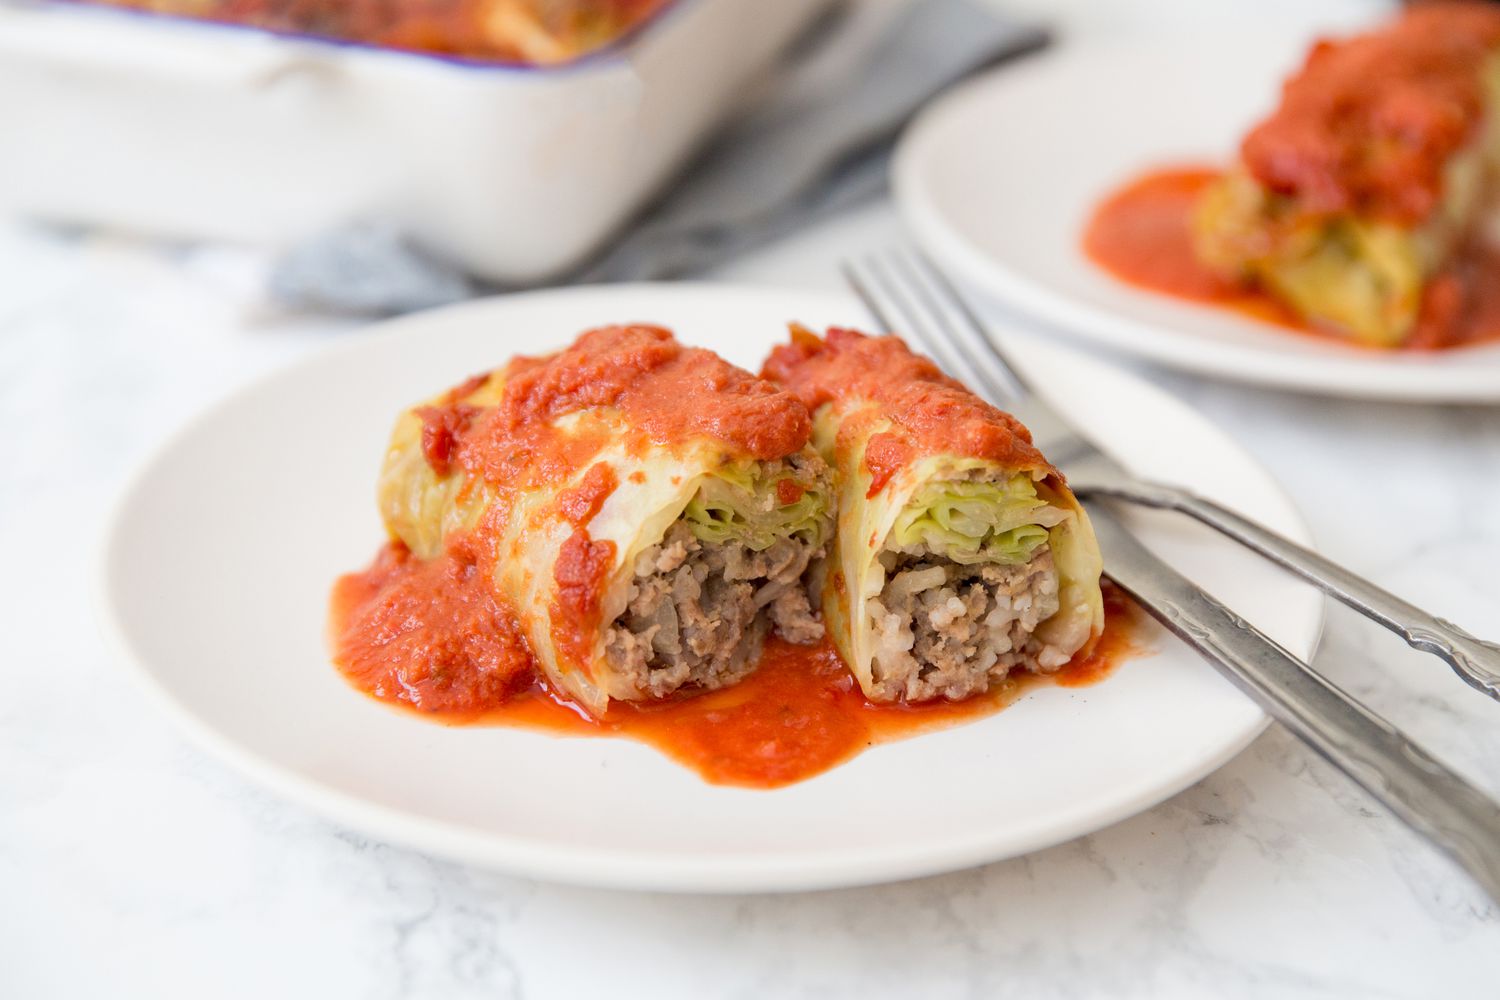 Stuffed cabbage rolls with ground beef and rice on a plate